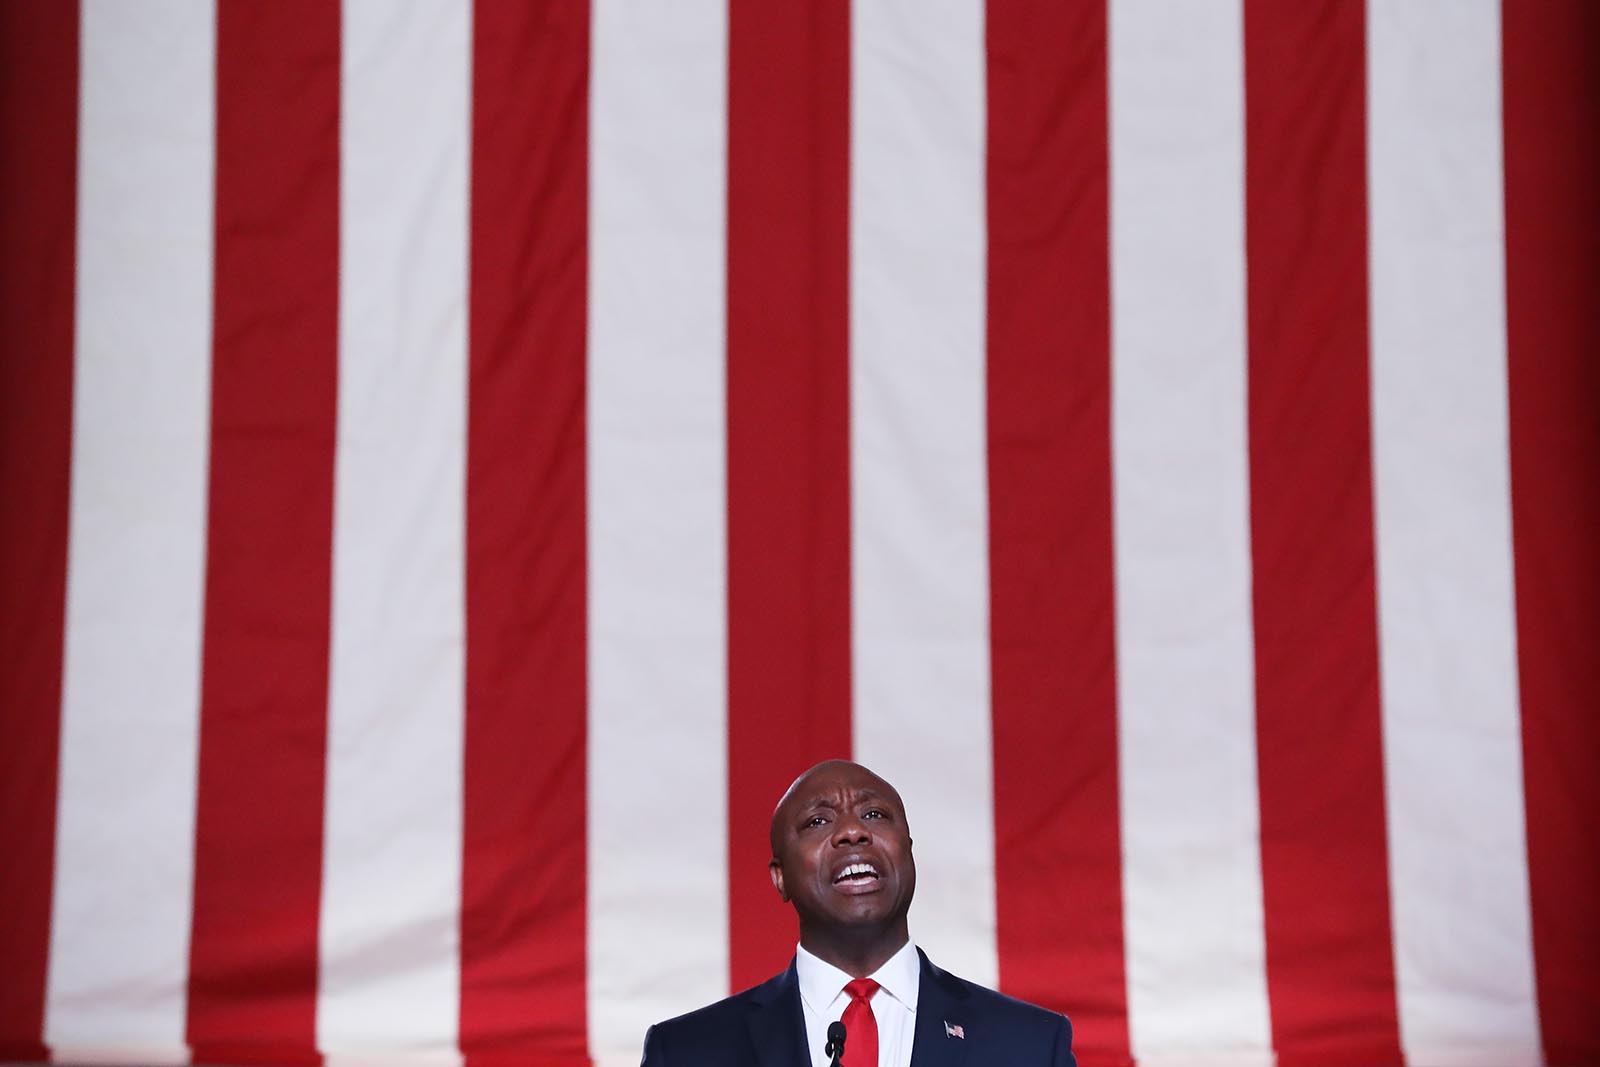 Sen. Tim Scott of South Carolina stands on stage in an empty Mellon Auditorium while addressing the Republican National Convention on Monday in Washington.